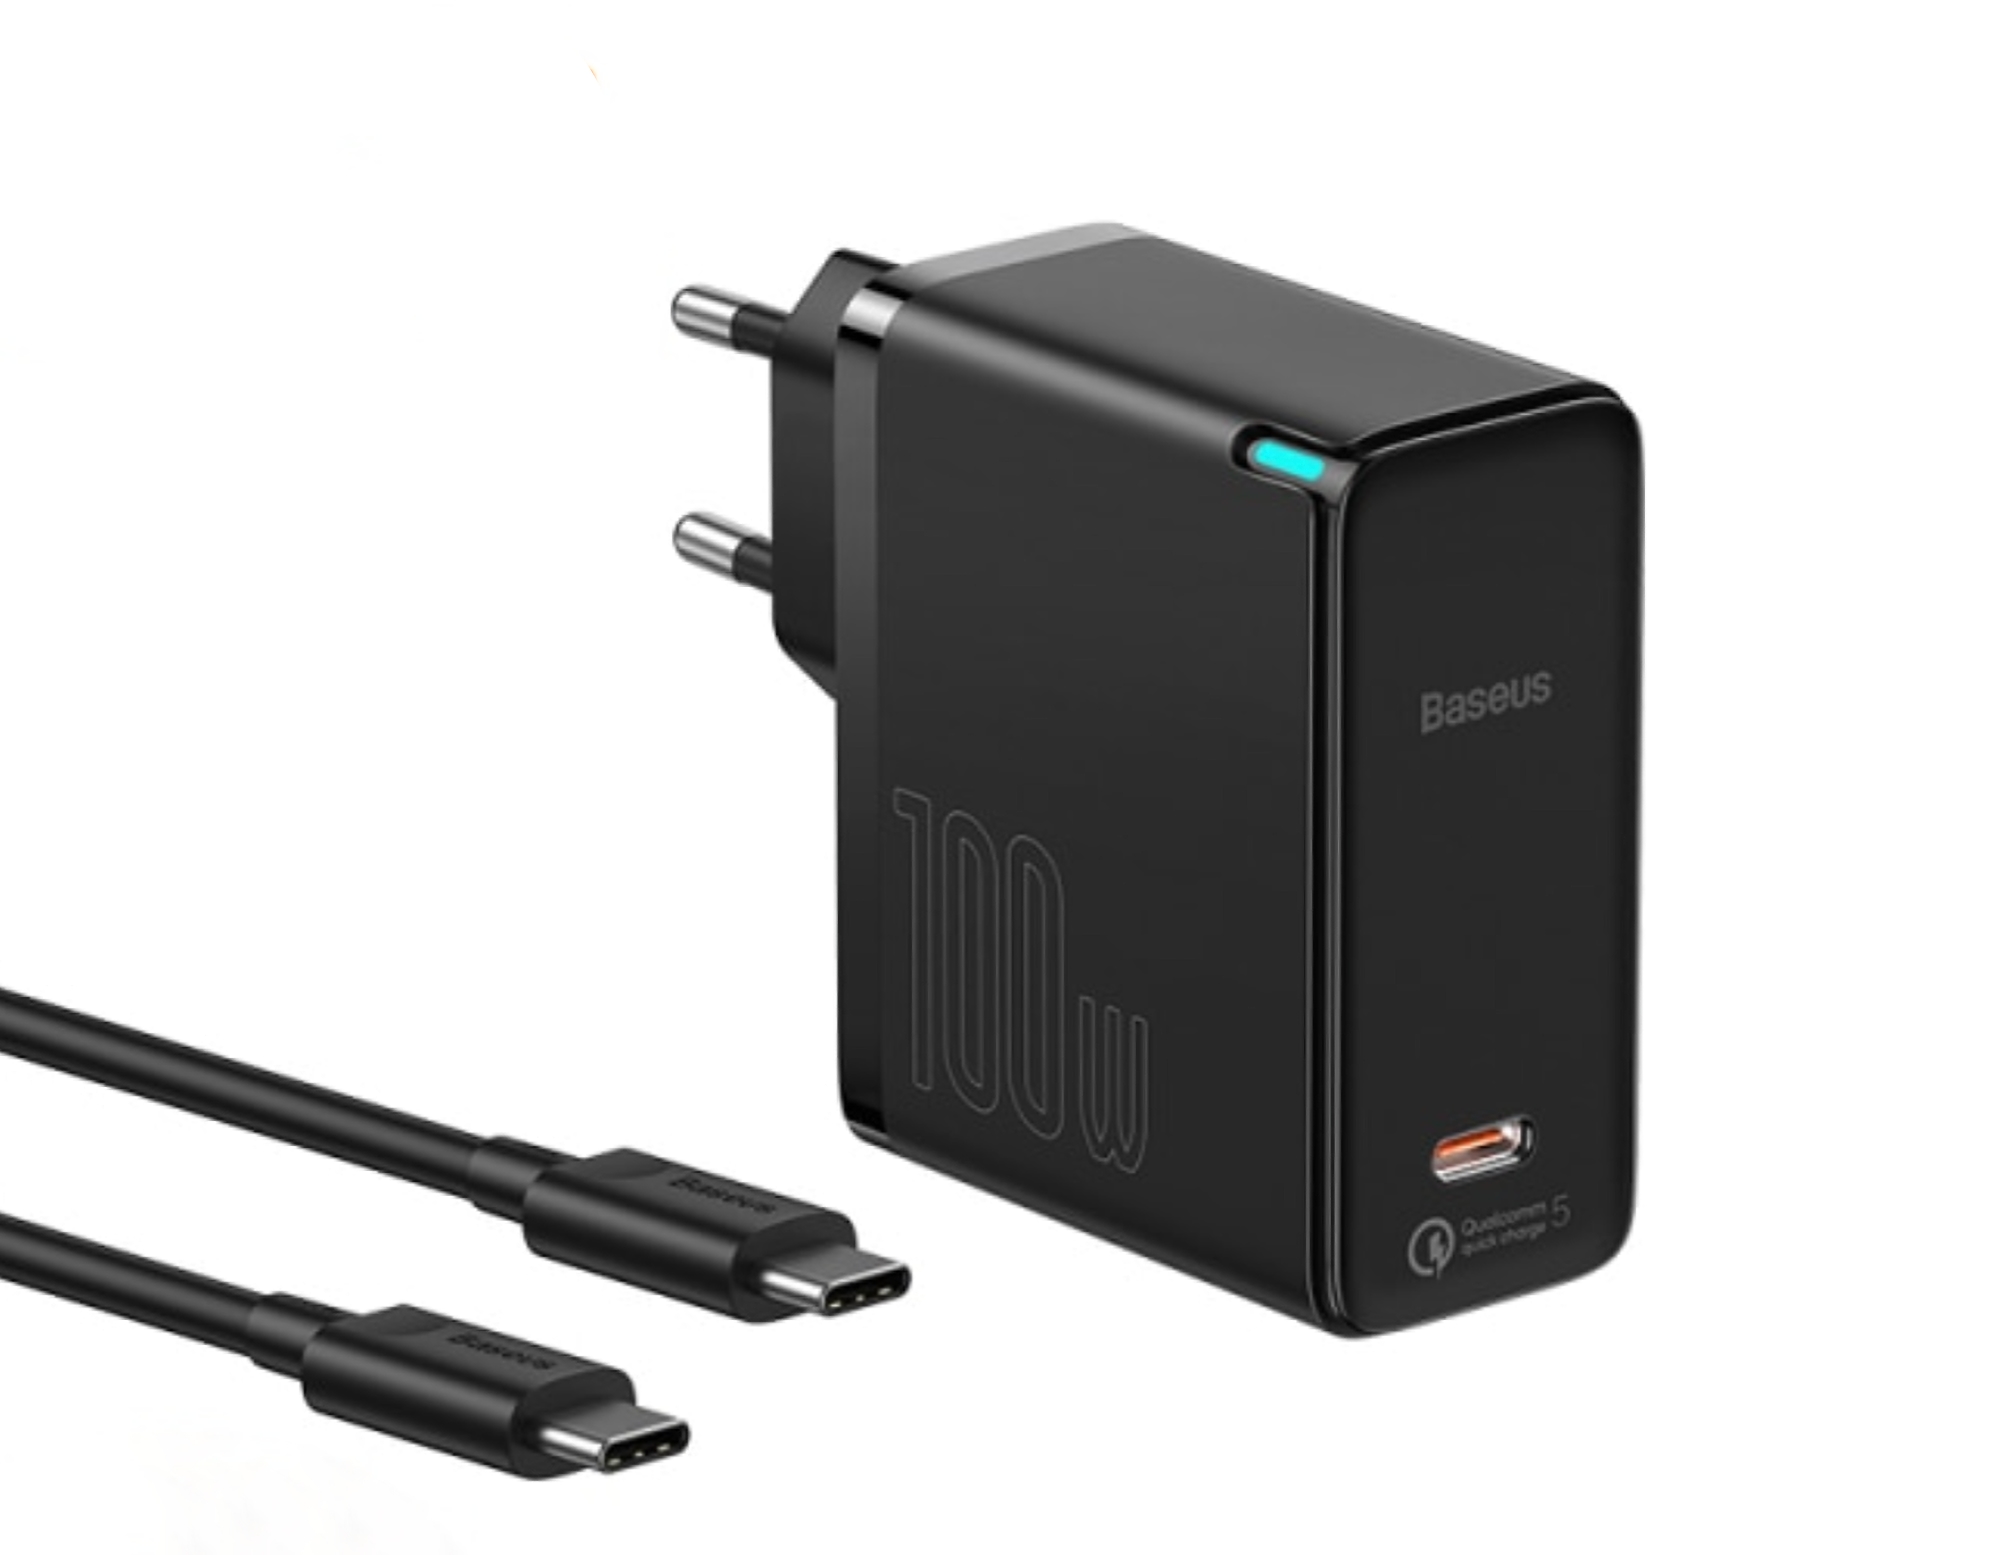 Baseus 100-watt GaN charger with USB-C port can be purchased at AliExpress 11.11 sale for $35